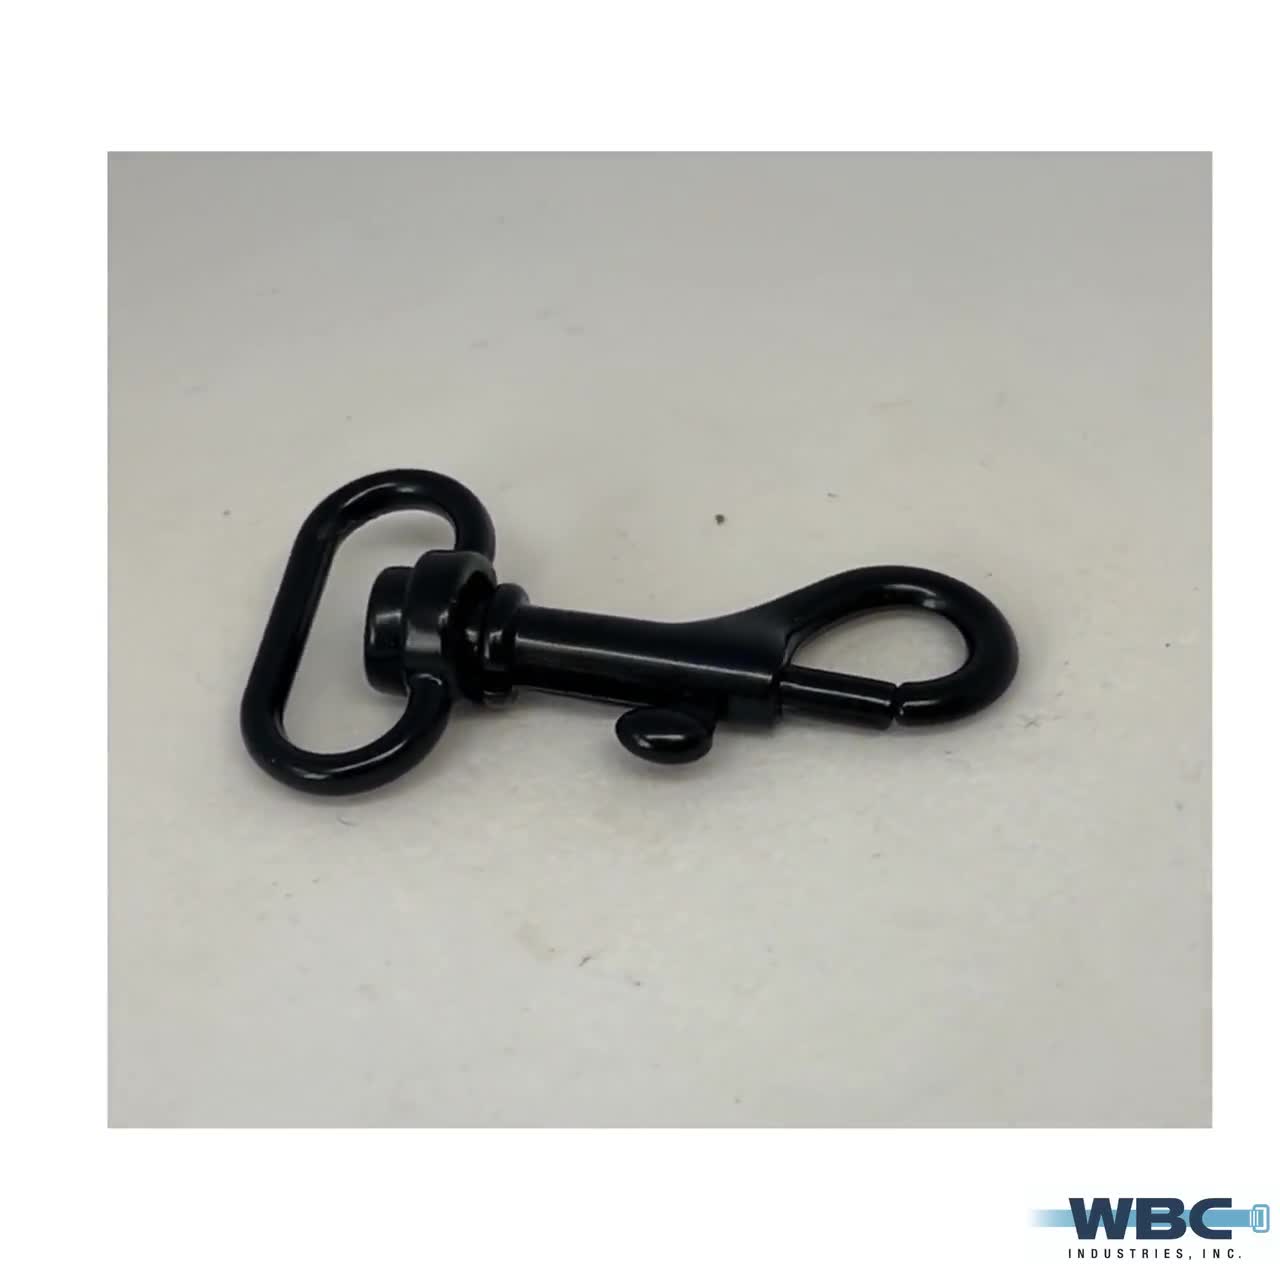 3/4 Black Swivel Hooks With Spring Snap Sold in Packs of 4 